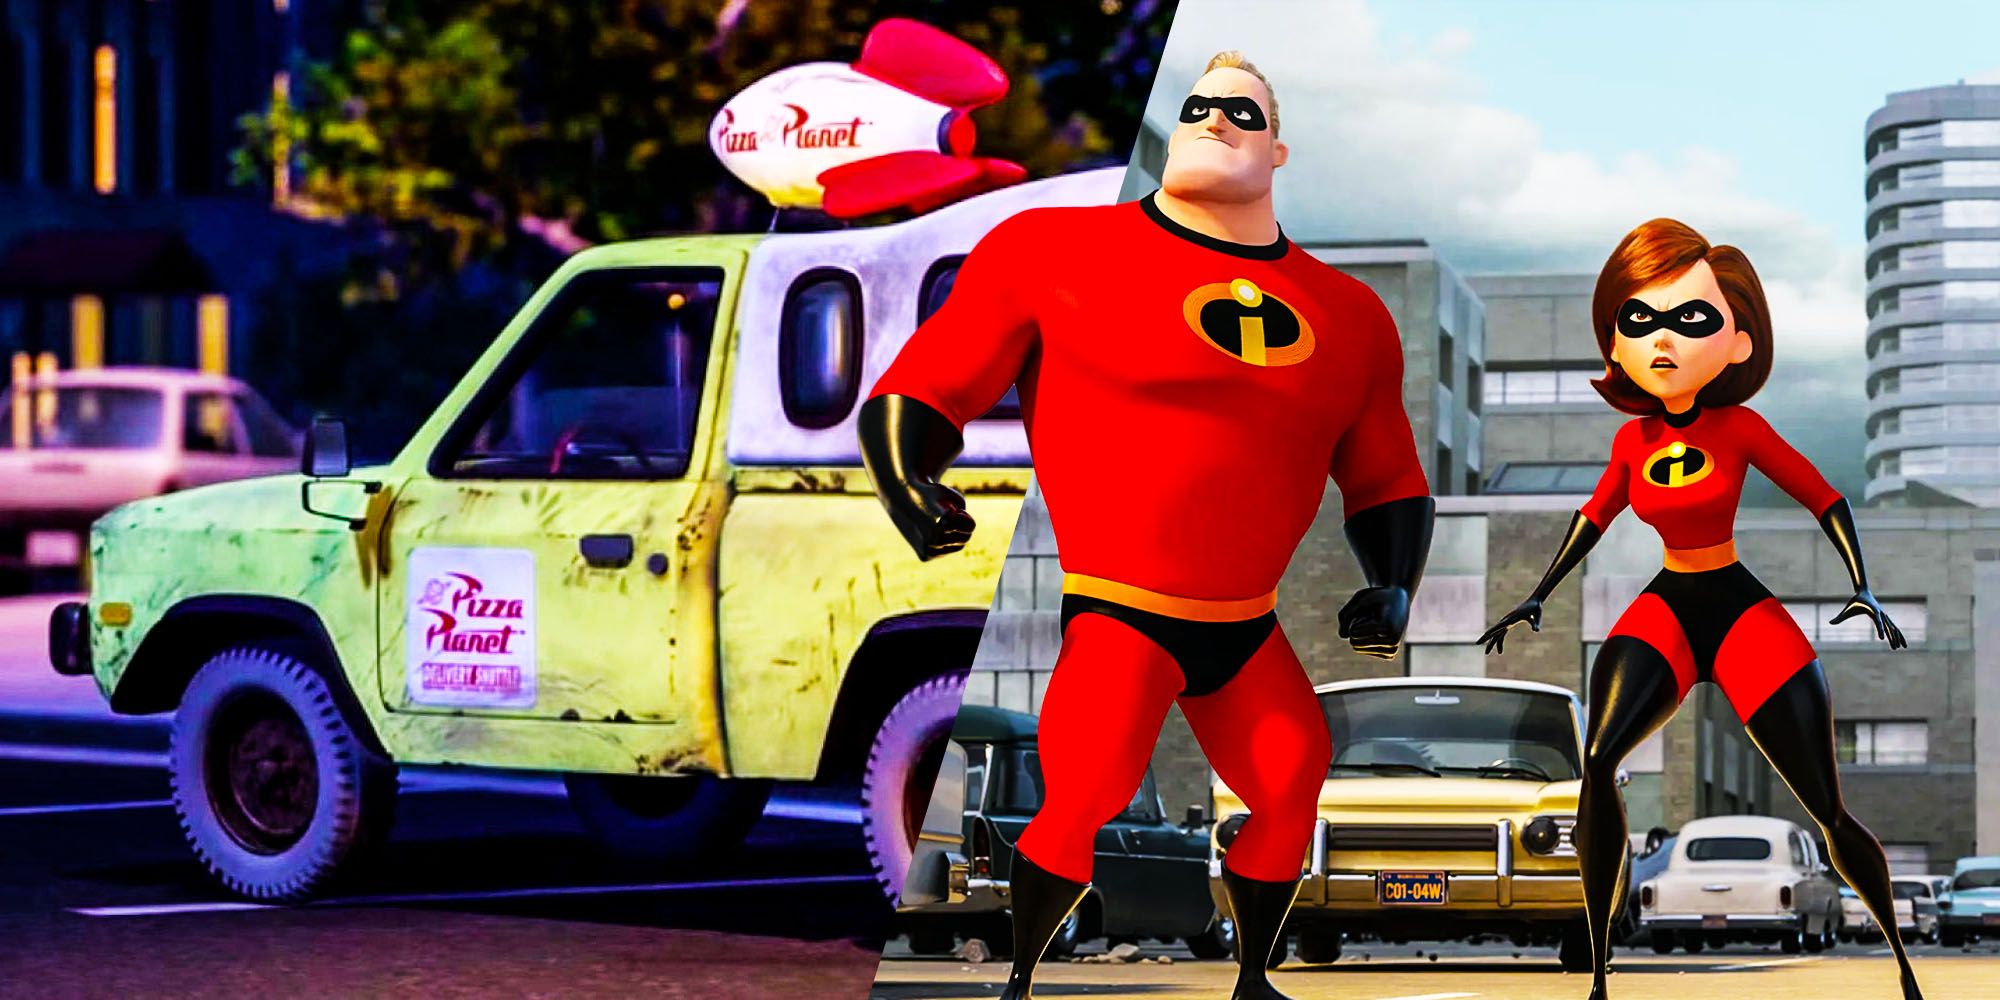 Incredibles different from every pixar movie no Pizza planet truck